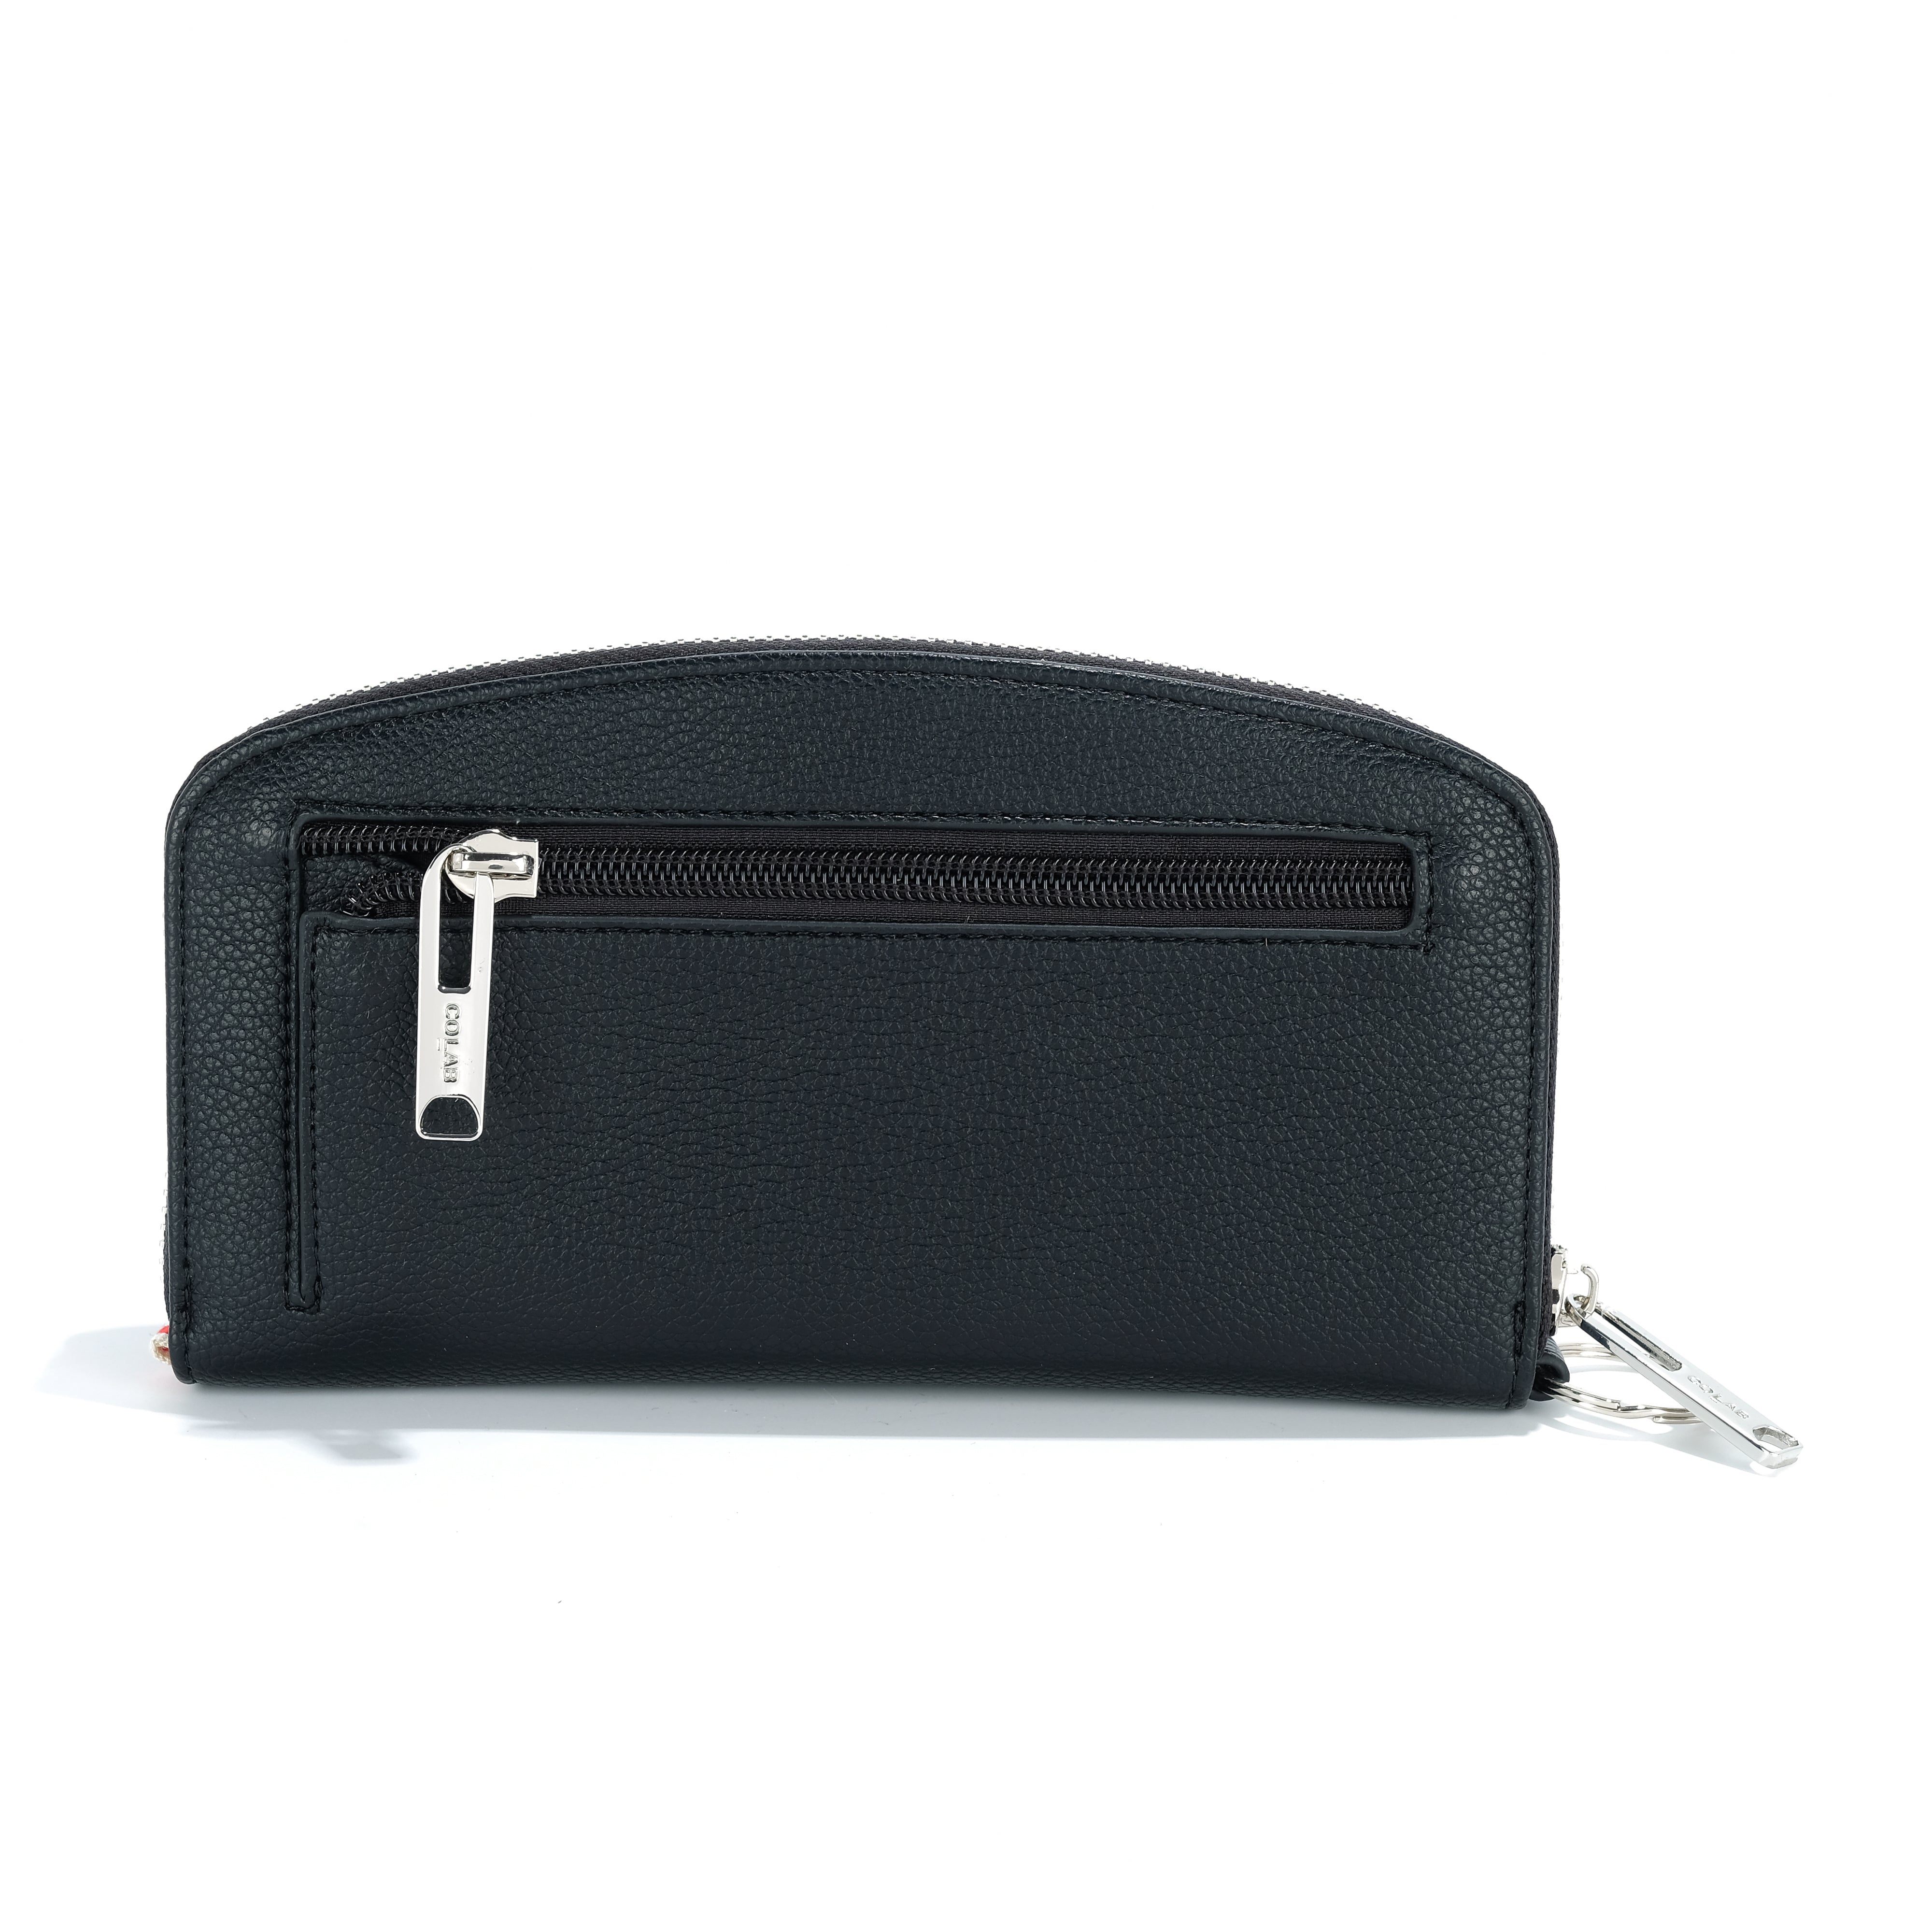 co-lab Isla Curved Wallet - Black Accessories - Other Accessories - Handbags & Wallets by co-lab | Grace the Boutique